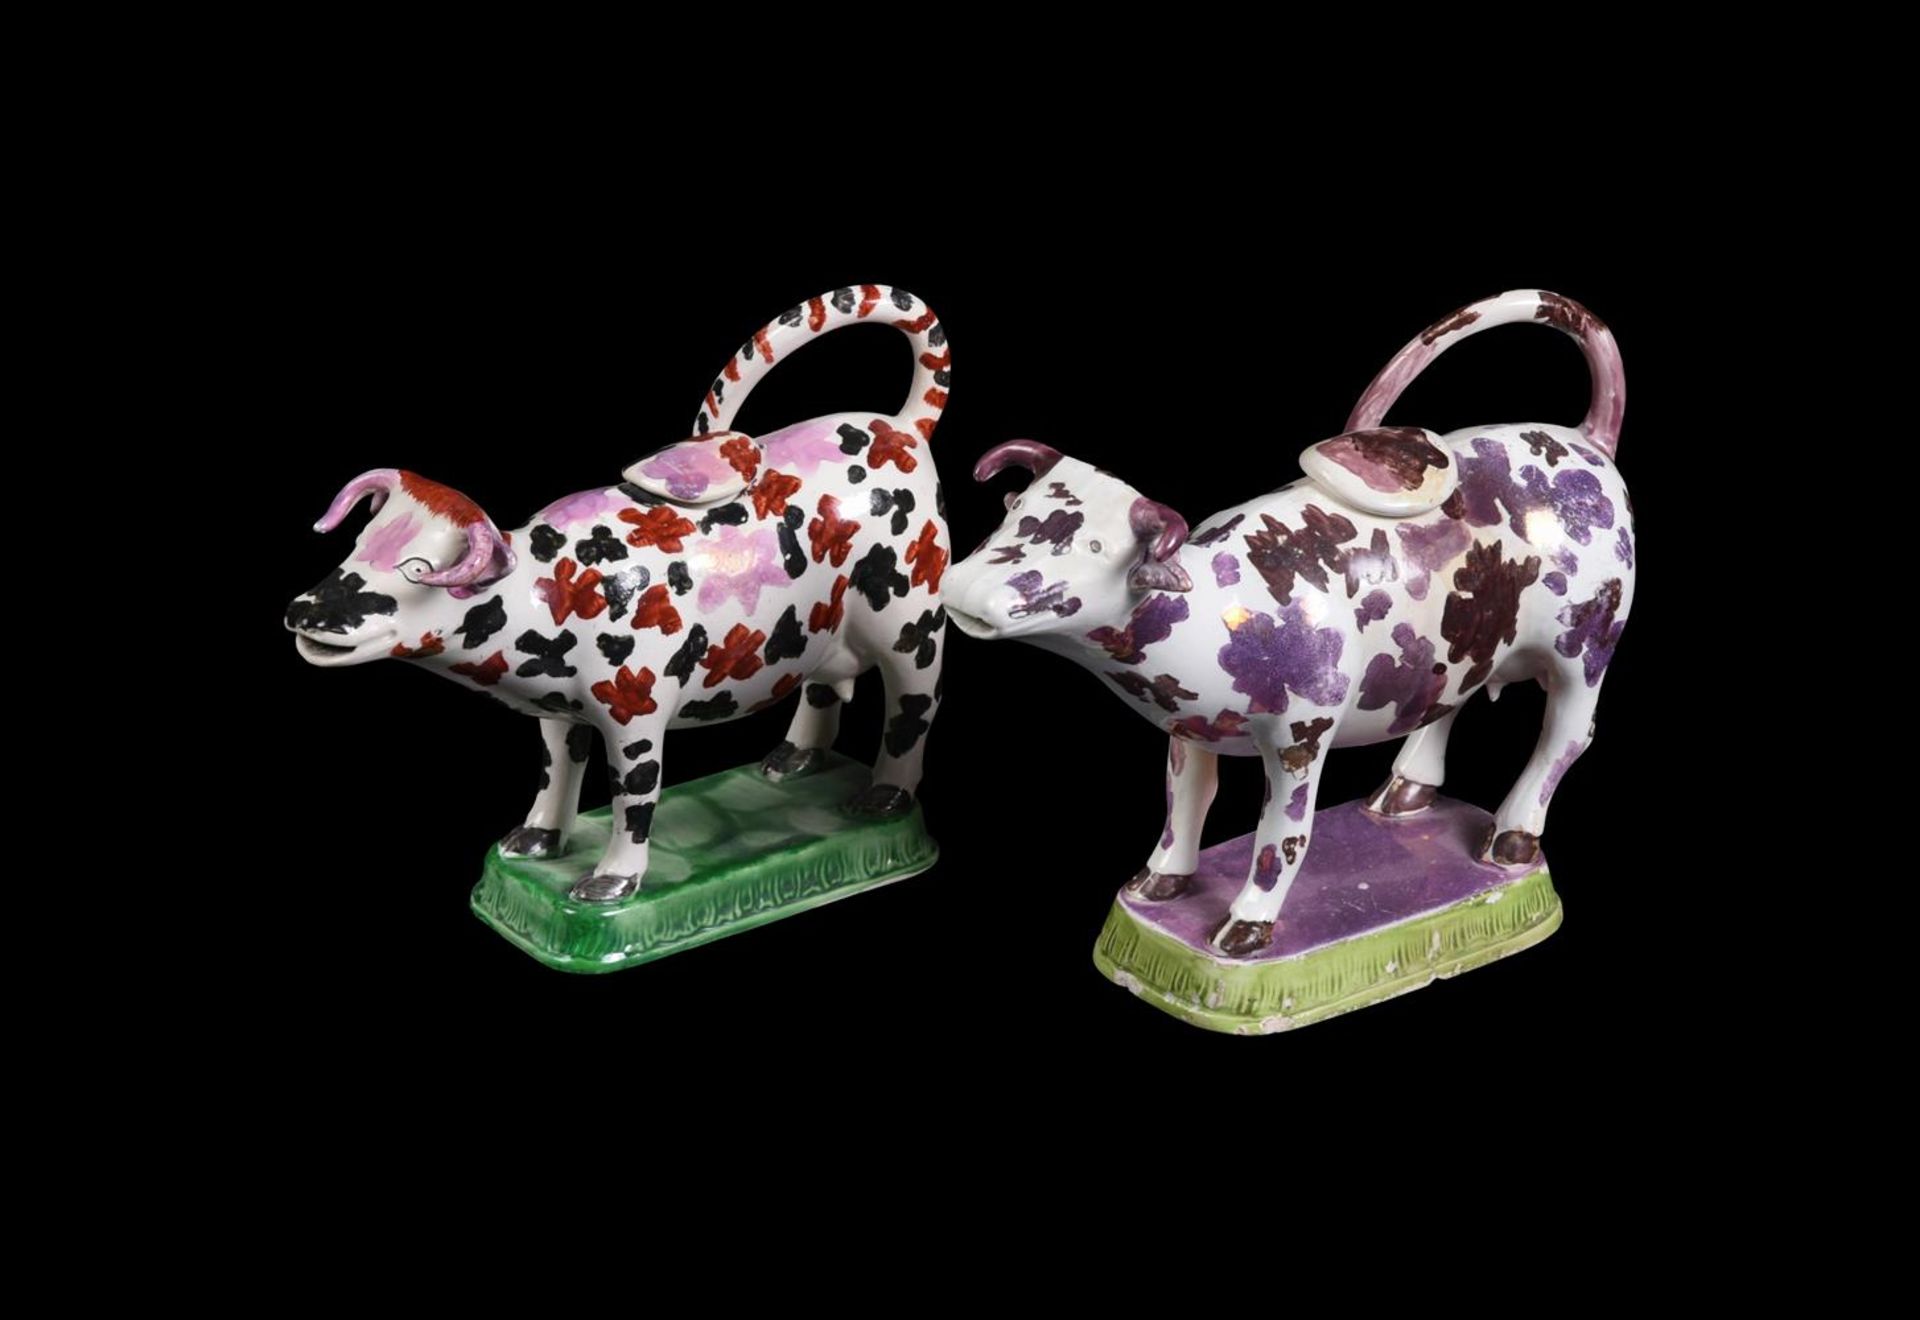 TWO SIMILAR BRITISH PEARLWARE MODELS OF COW CREAMERS - Image 2 of 2